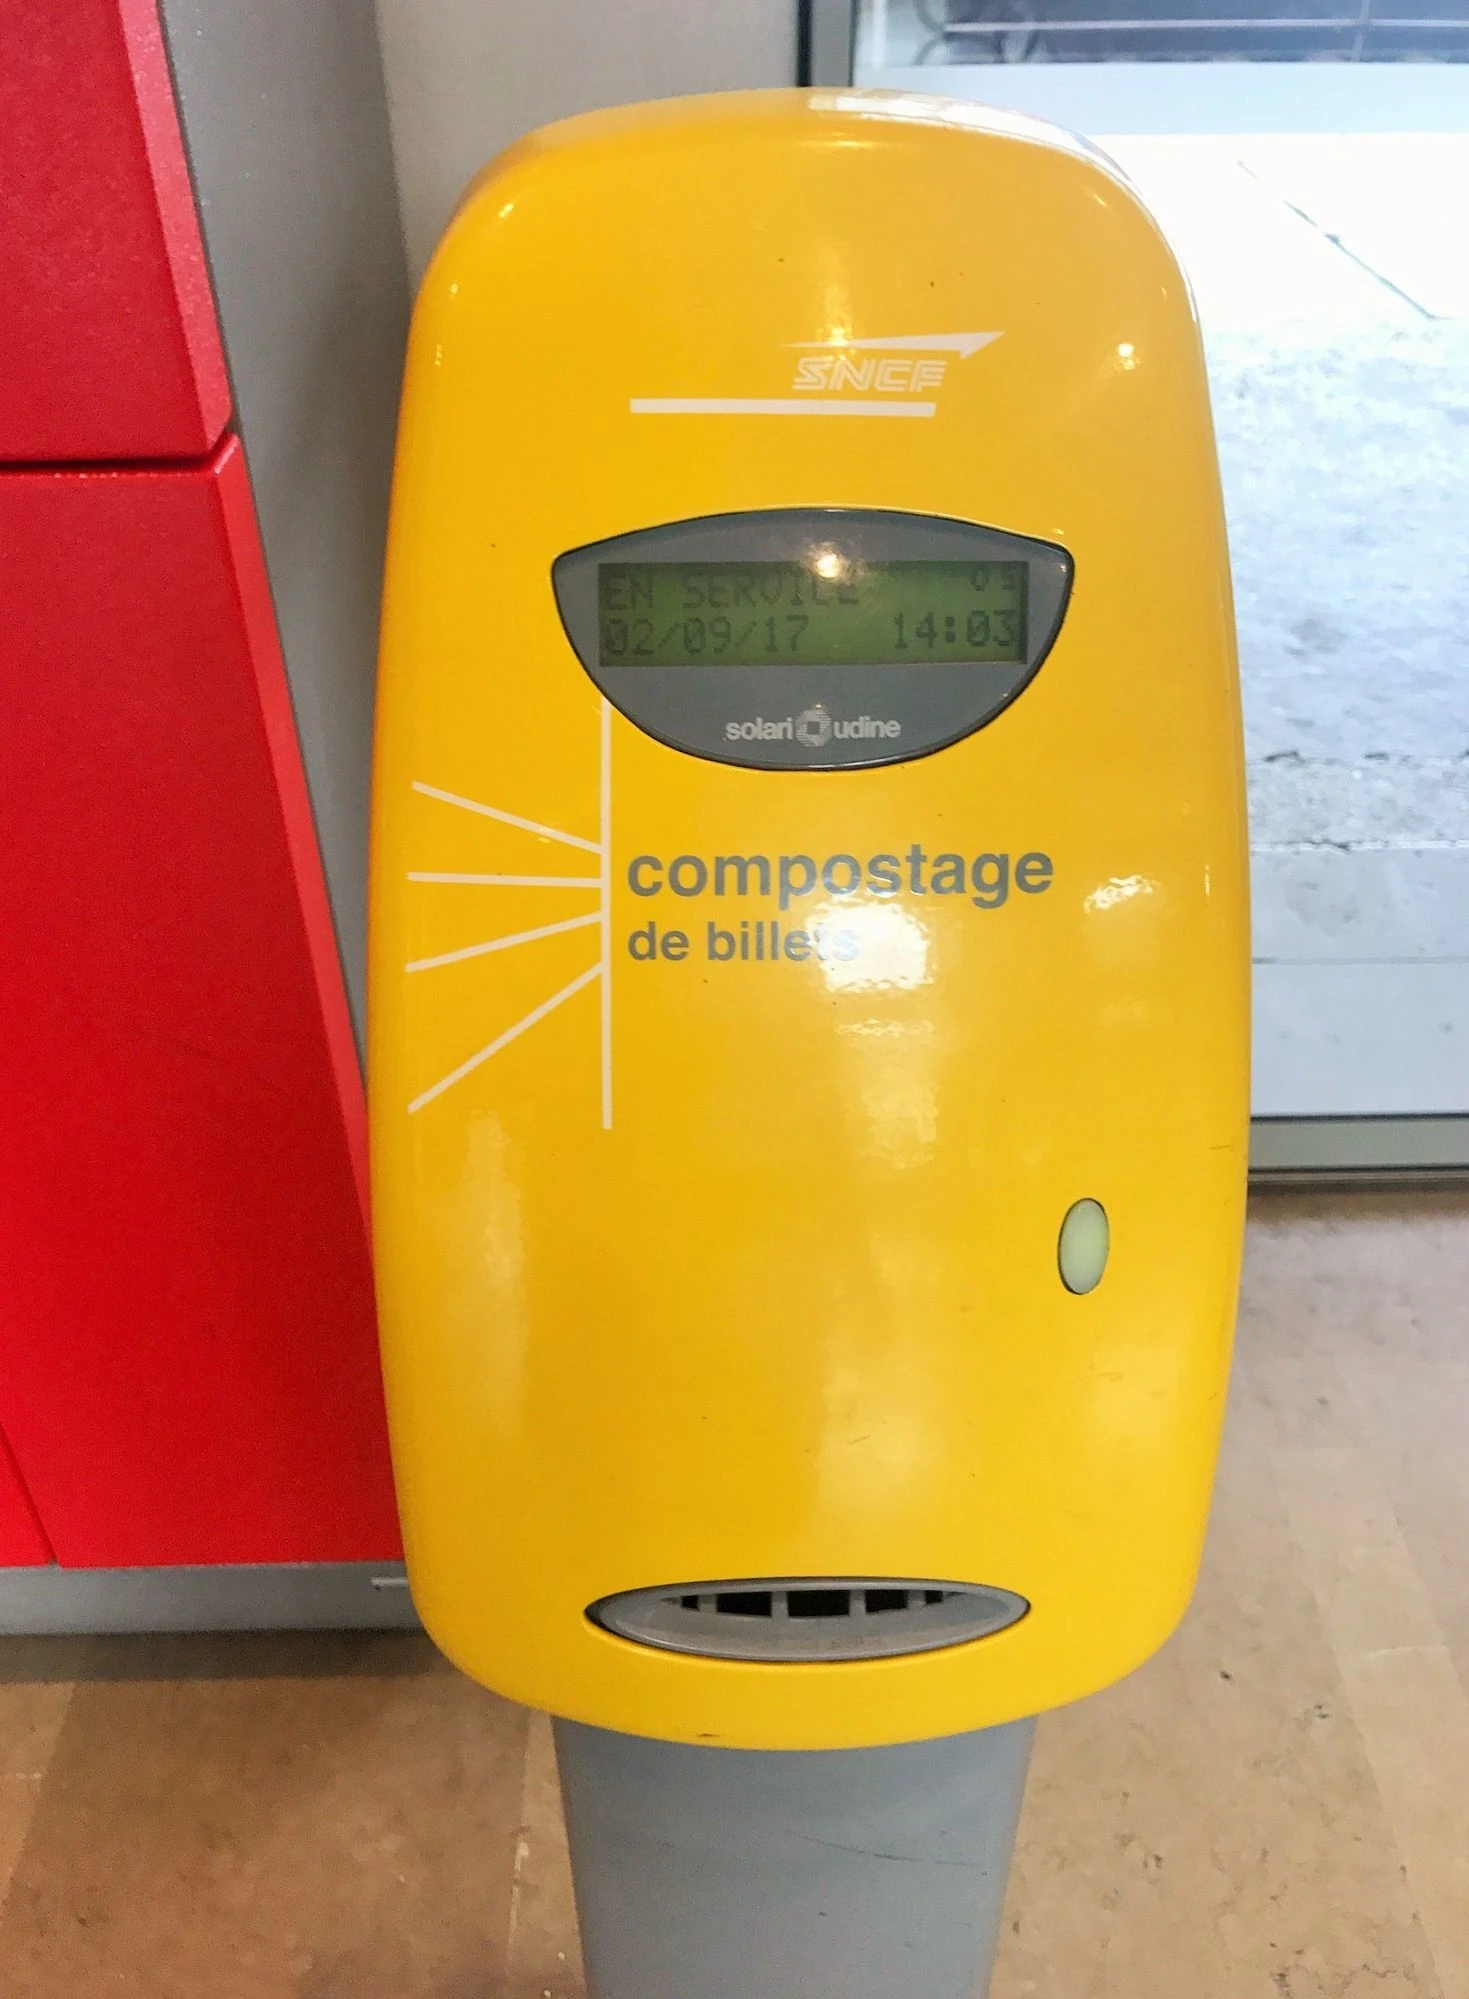 A SNCF ticket stamping machine